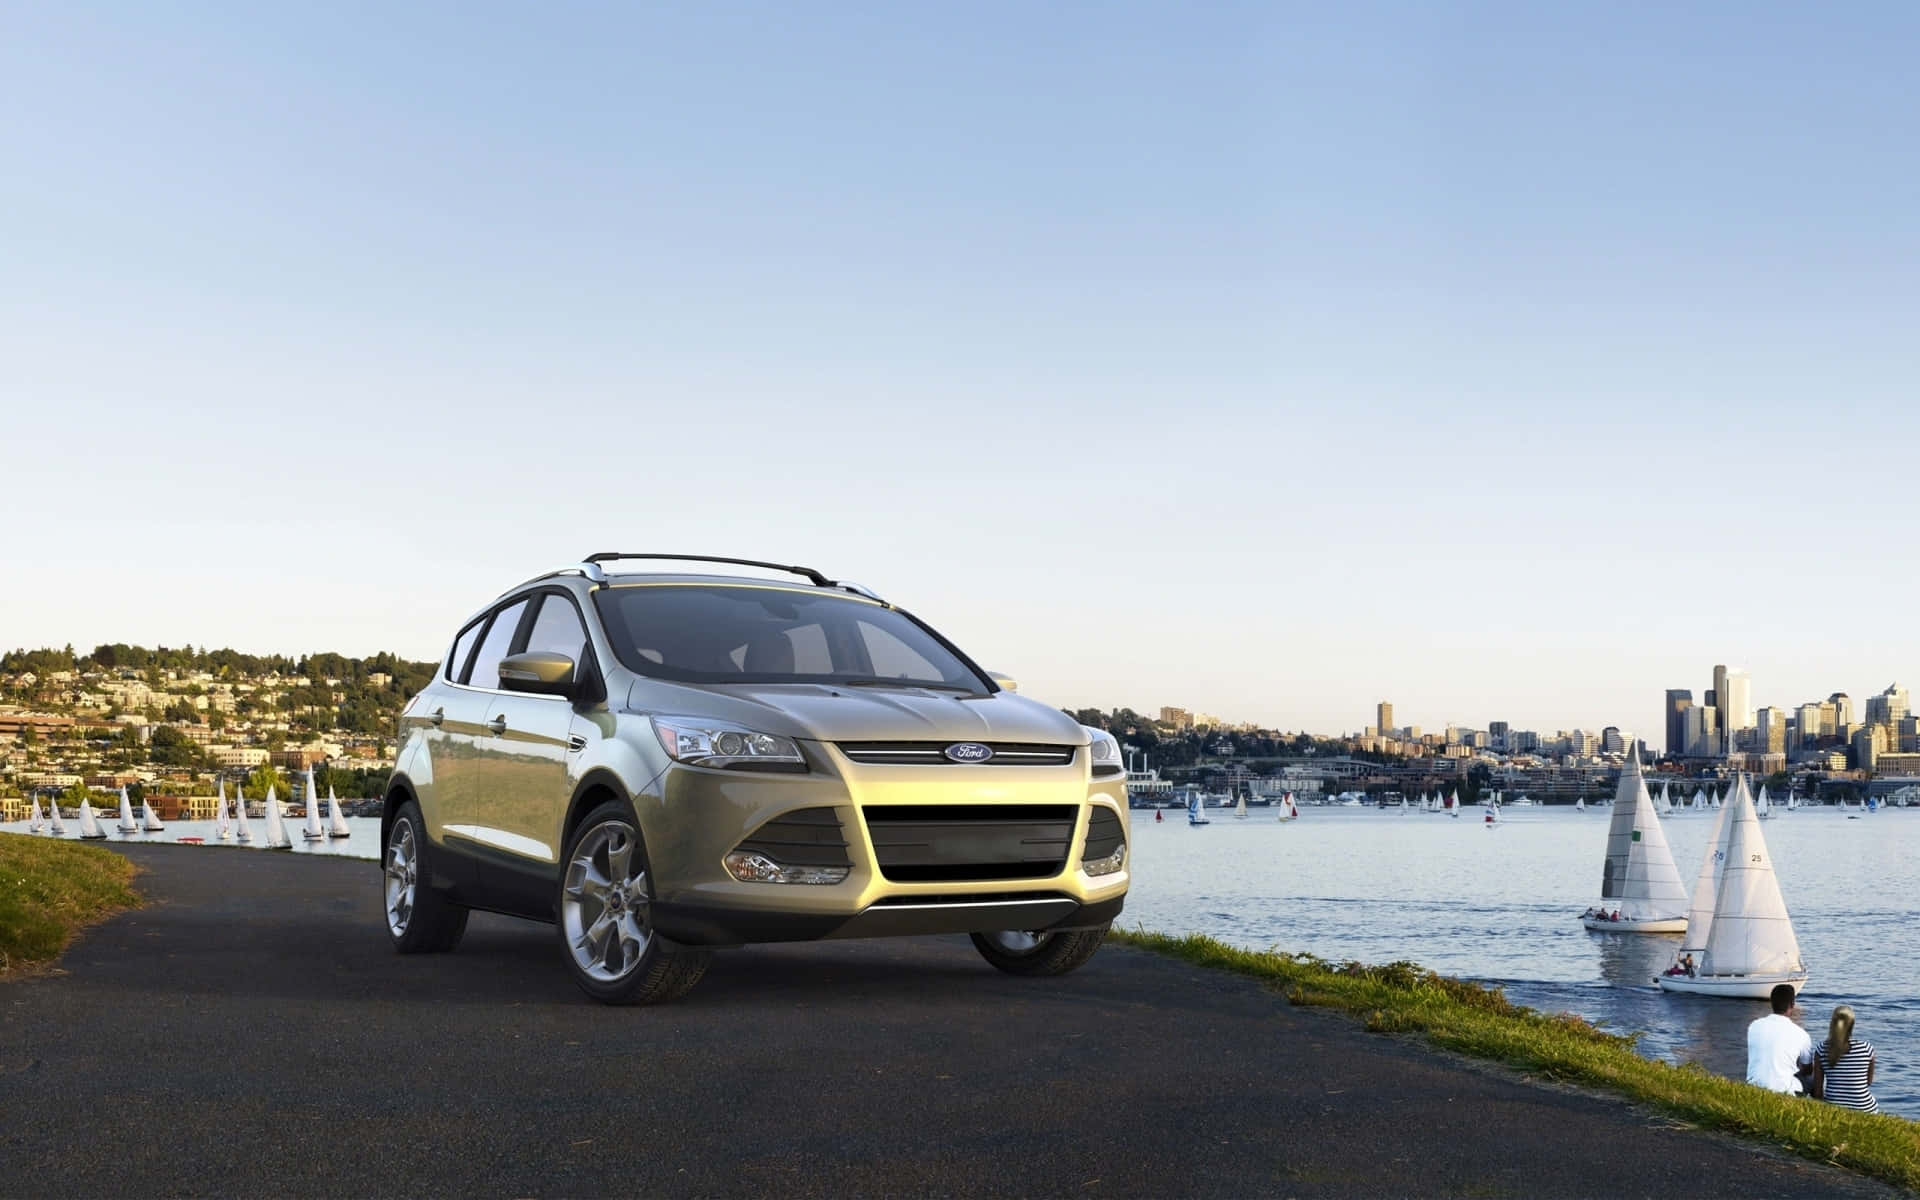 Sleek and Stylish Ford Escape on the Road Wallpaper